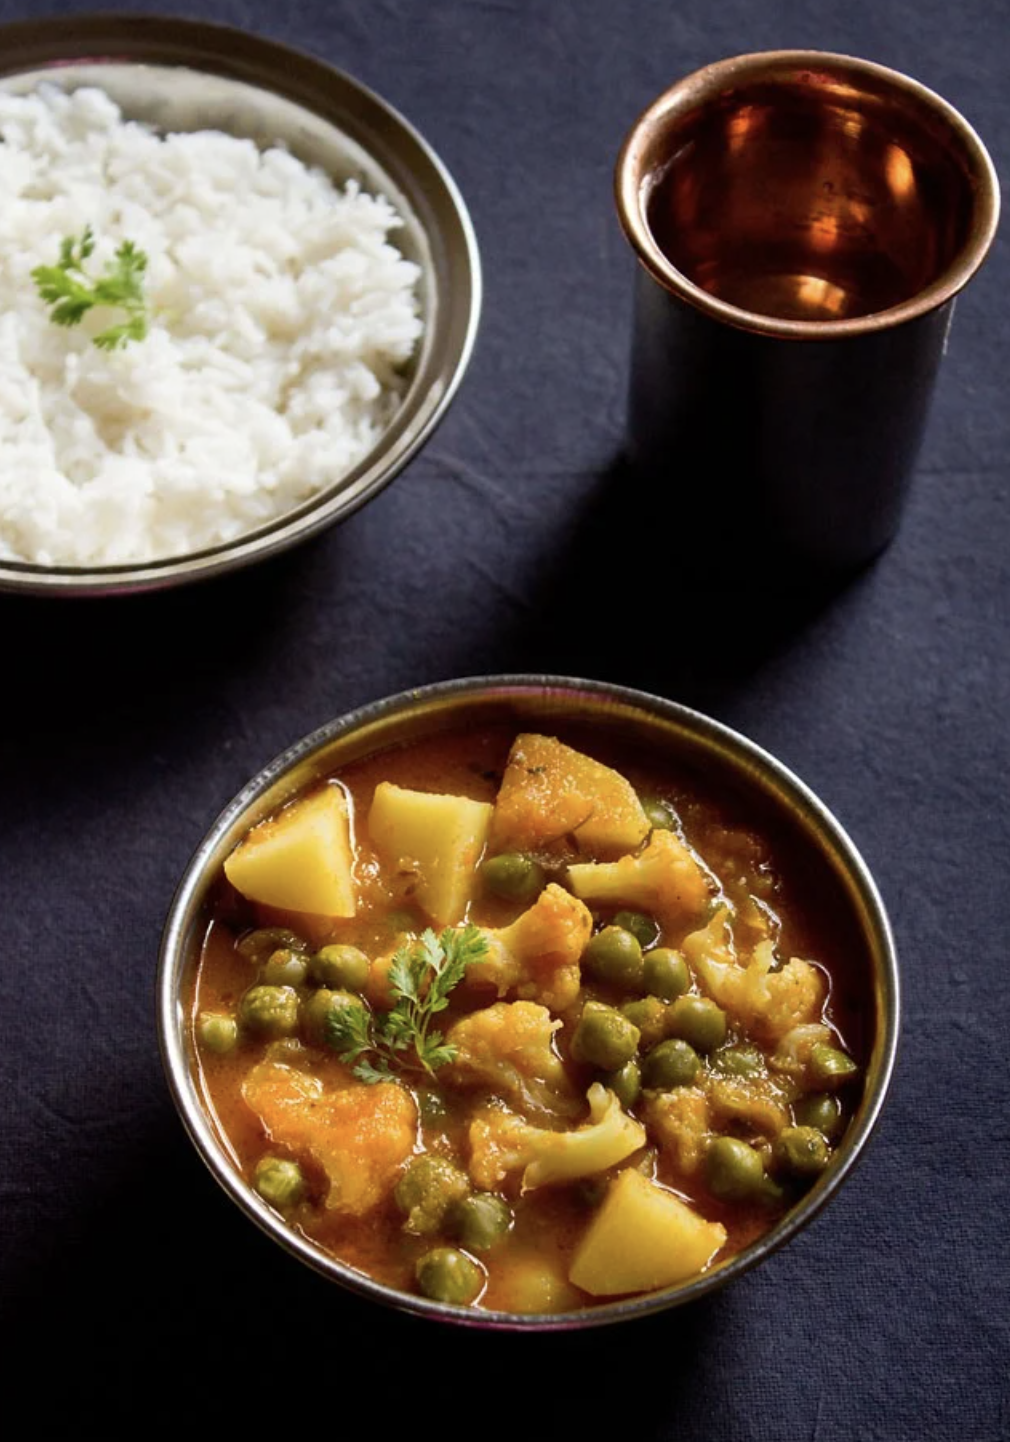 Aloo matar (potato and pea curry) served with rice and a cup, on a dark surface